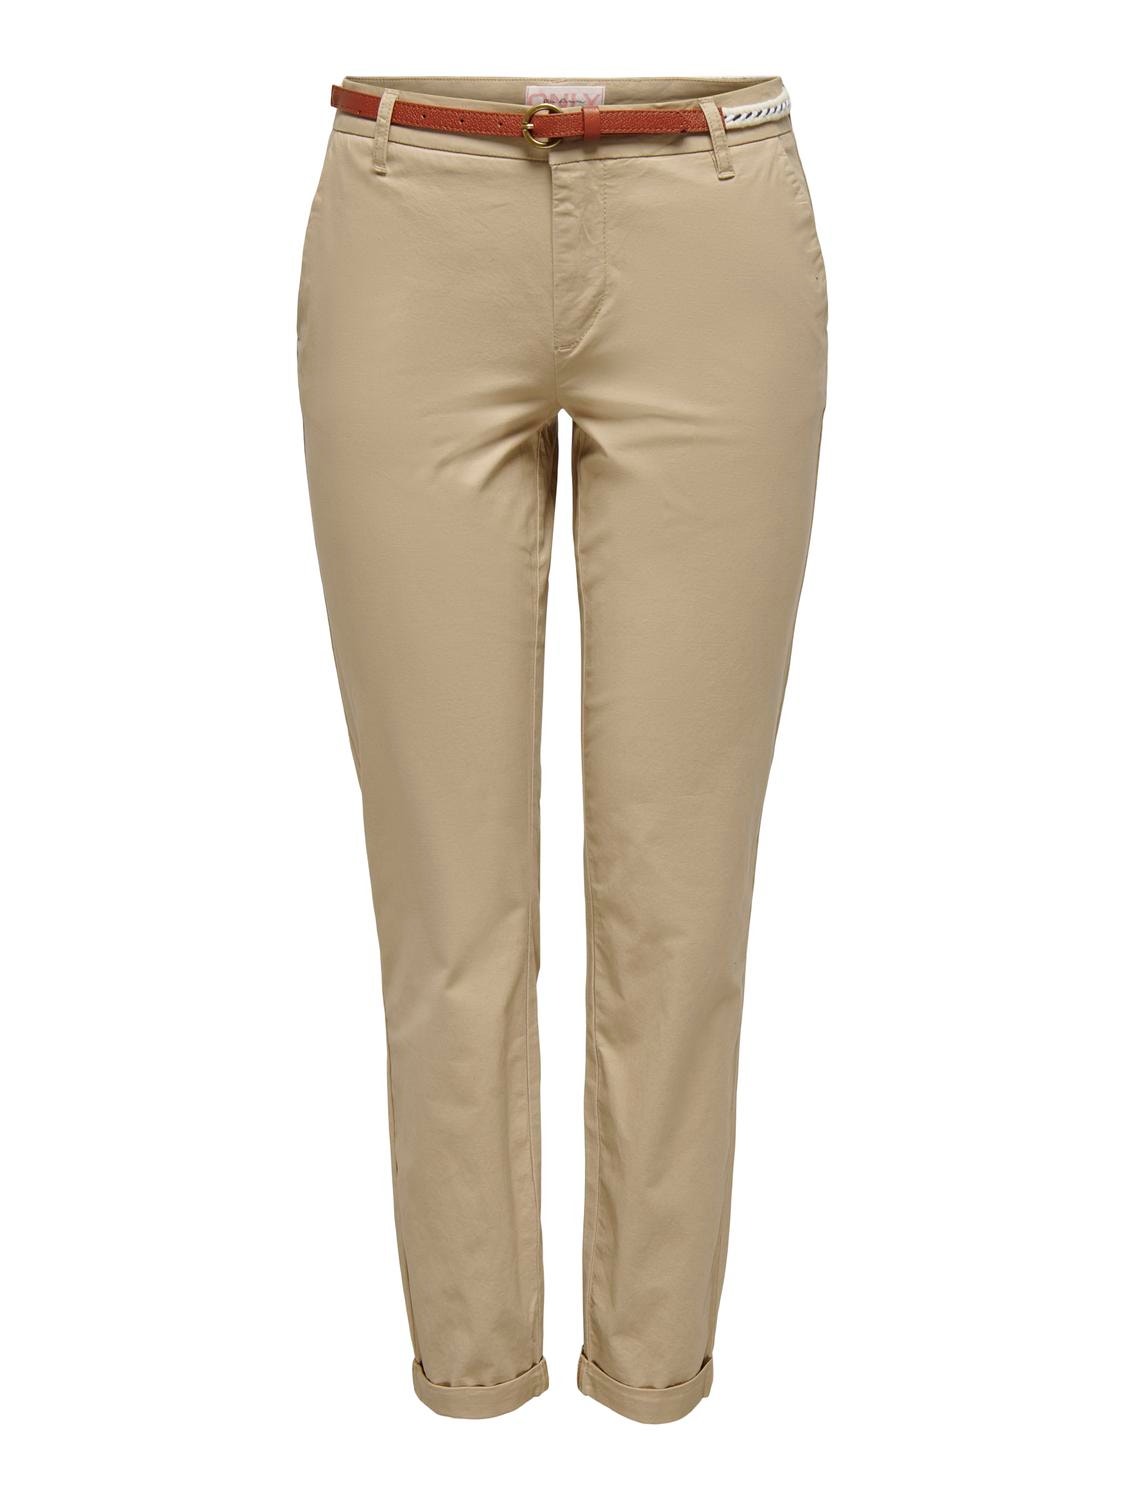 ONLY Classic Chinos -Nomad - 15218519